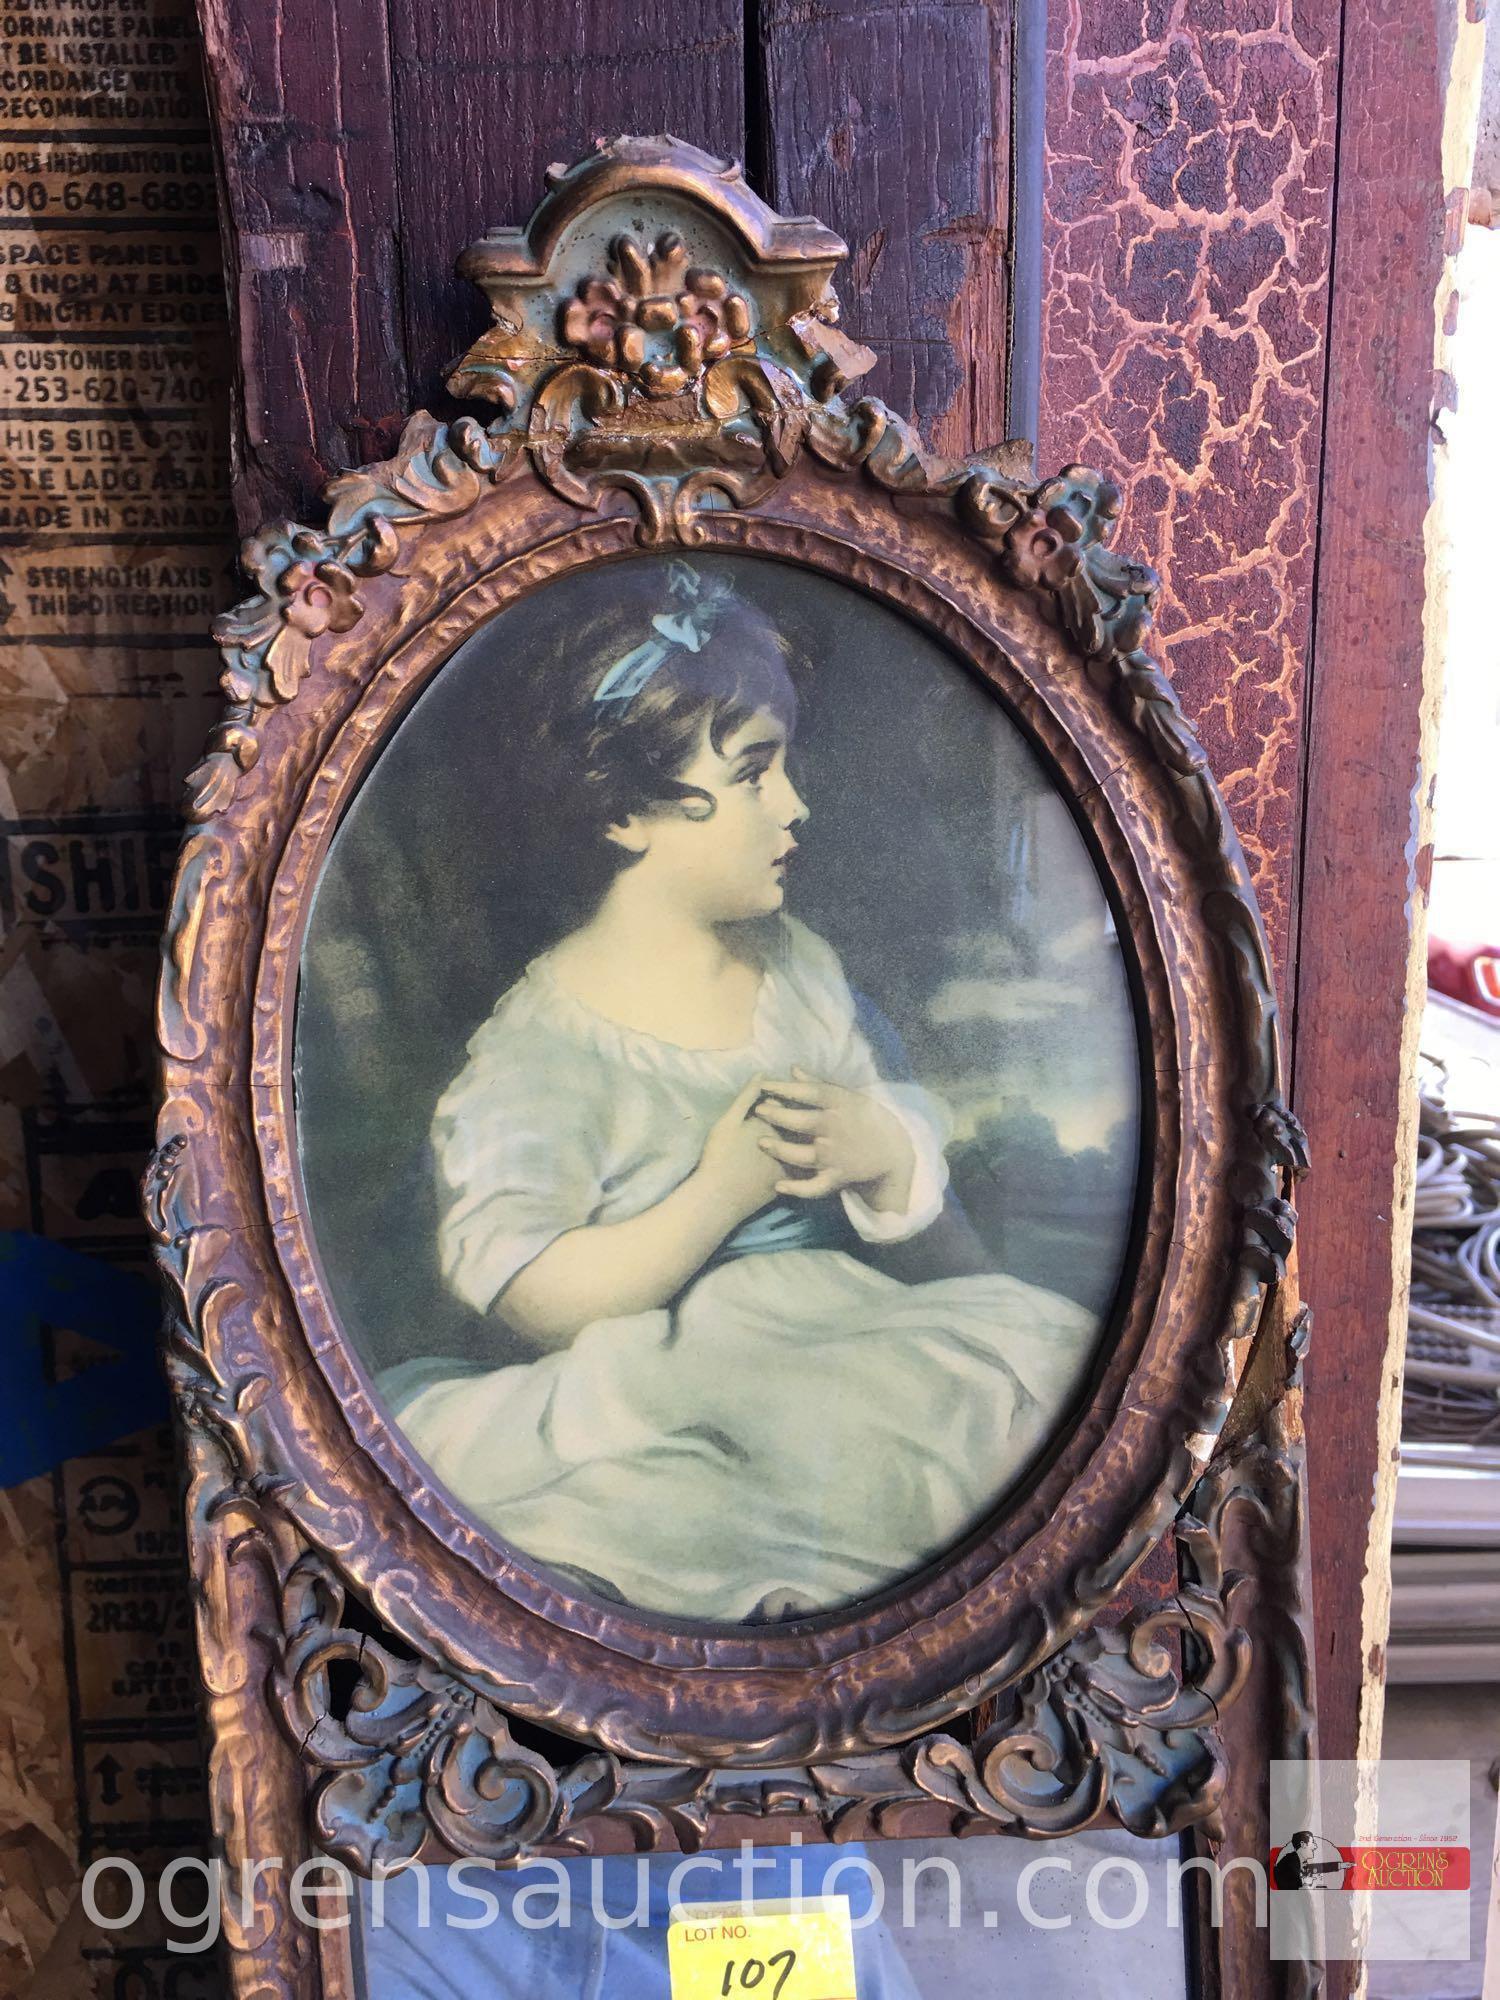 Vintage wall mirror/artwork, young girl, ornate frame